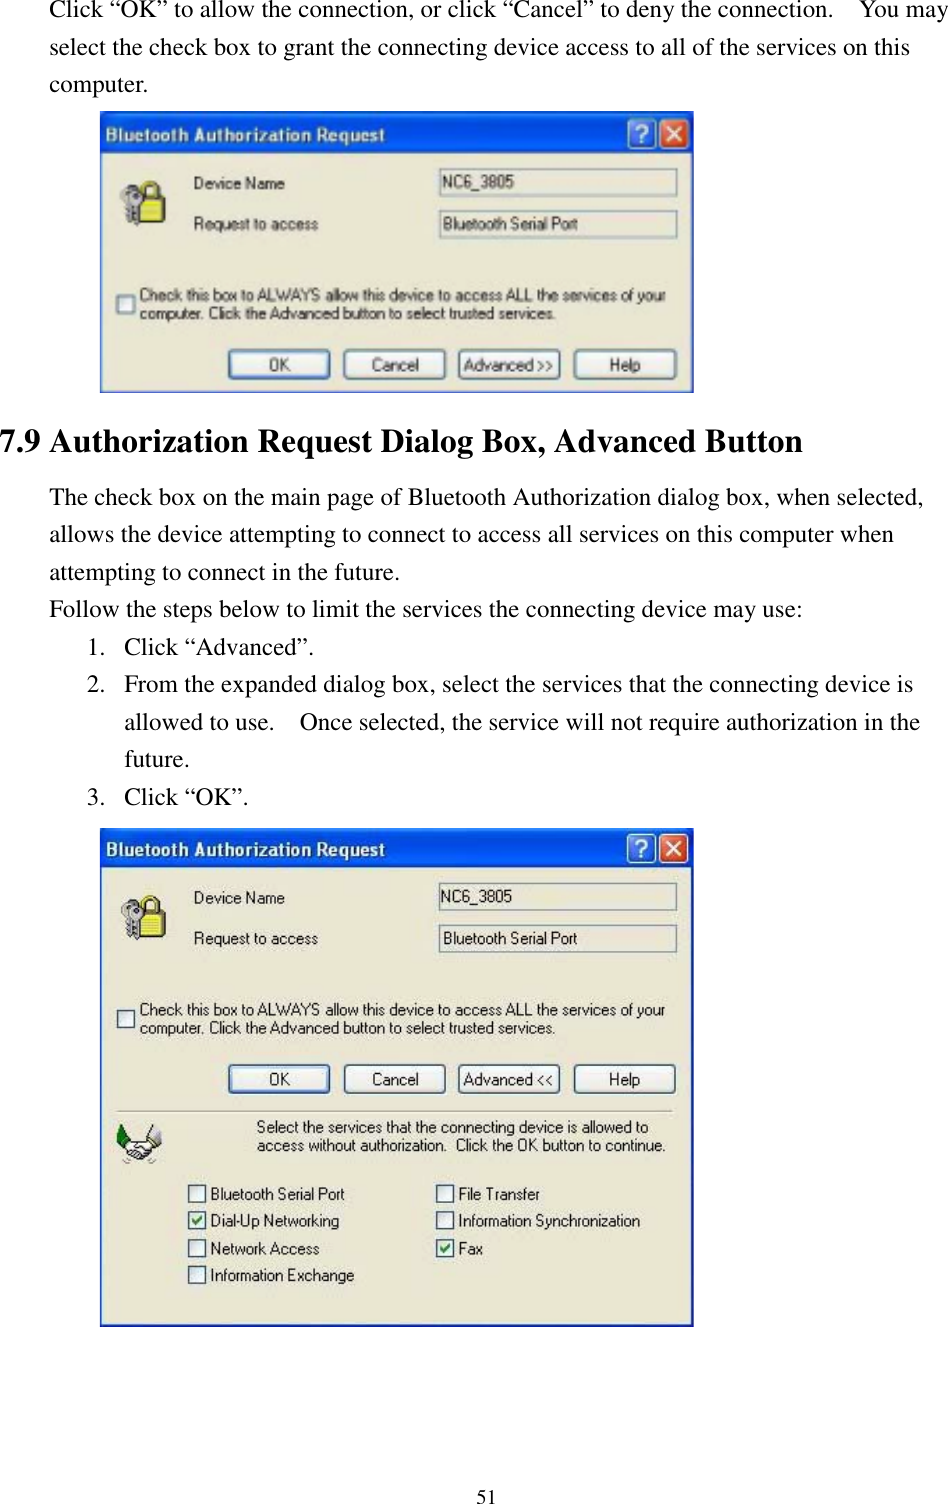 51Click “OK” to allow the connection, or click “Cancel” to deny the connection.    You mayselect the check box to grant the connecting device access to all of the services on thiscomputer.7.9 Authorization Request Dialog Box, Advanced ButtonThe check box on the main page of Bluetooth Authorization dialog box, when selected,allows the device attempting to connect to access all services on this computer whenattempting to connect in the future.Follow the steps below to limit the services the connecting device may use:1. Click “Advanced”.2. From the expanded dialog box, select the services that the connecting device isallowed to use.    Once selected, the service will not require authorization in thefuture.3. Click “OK”.